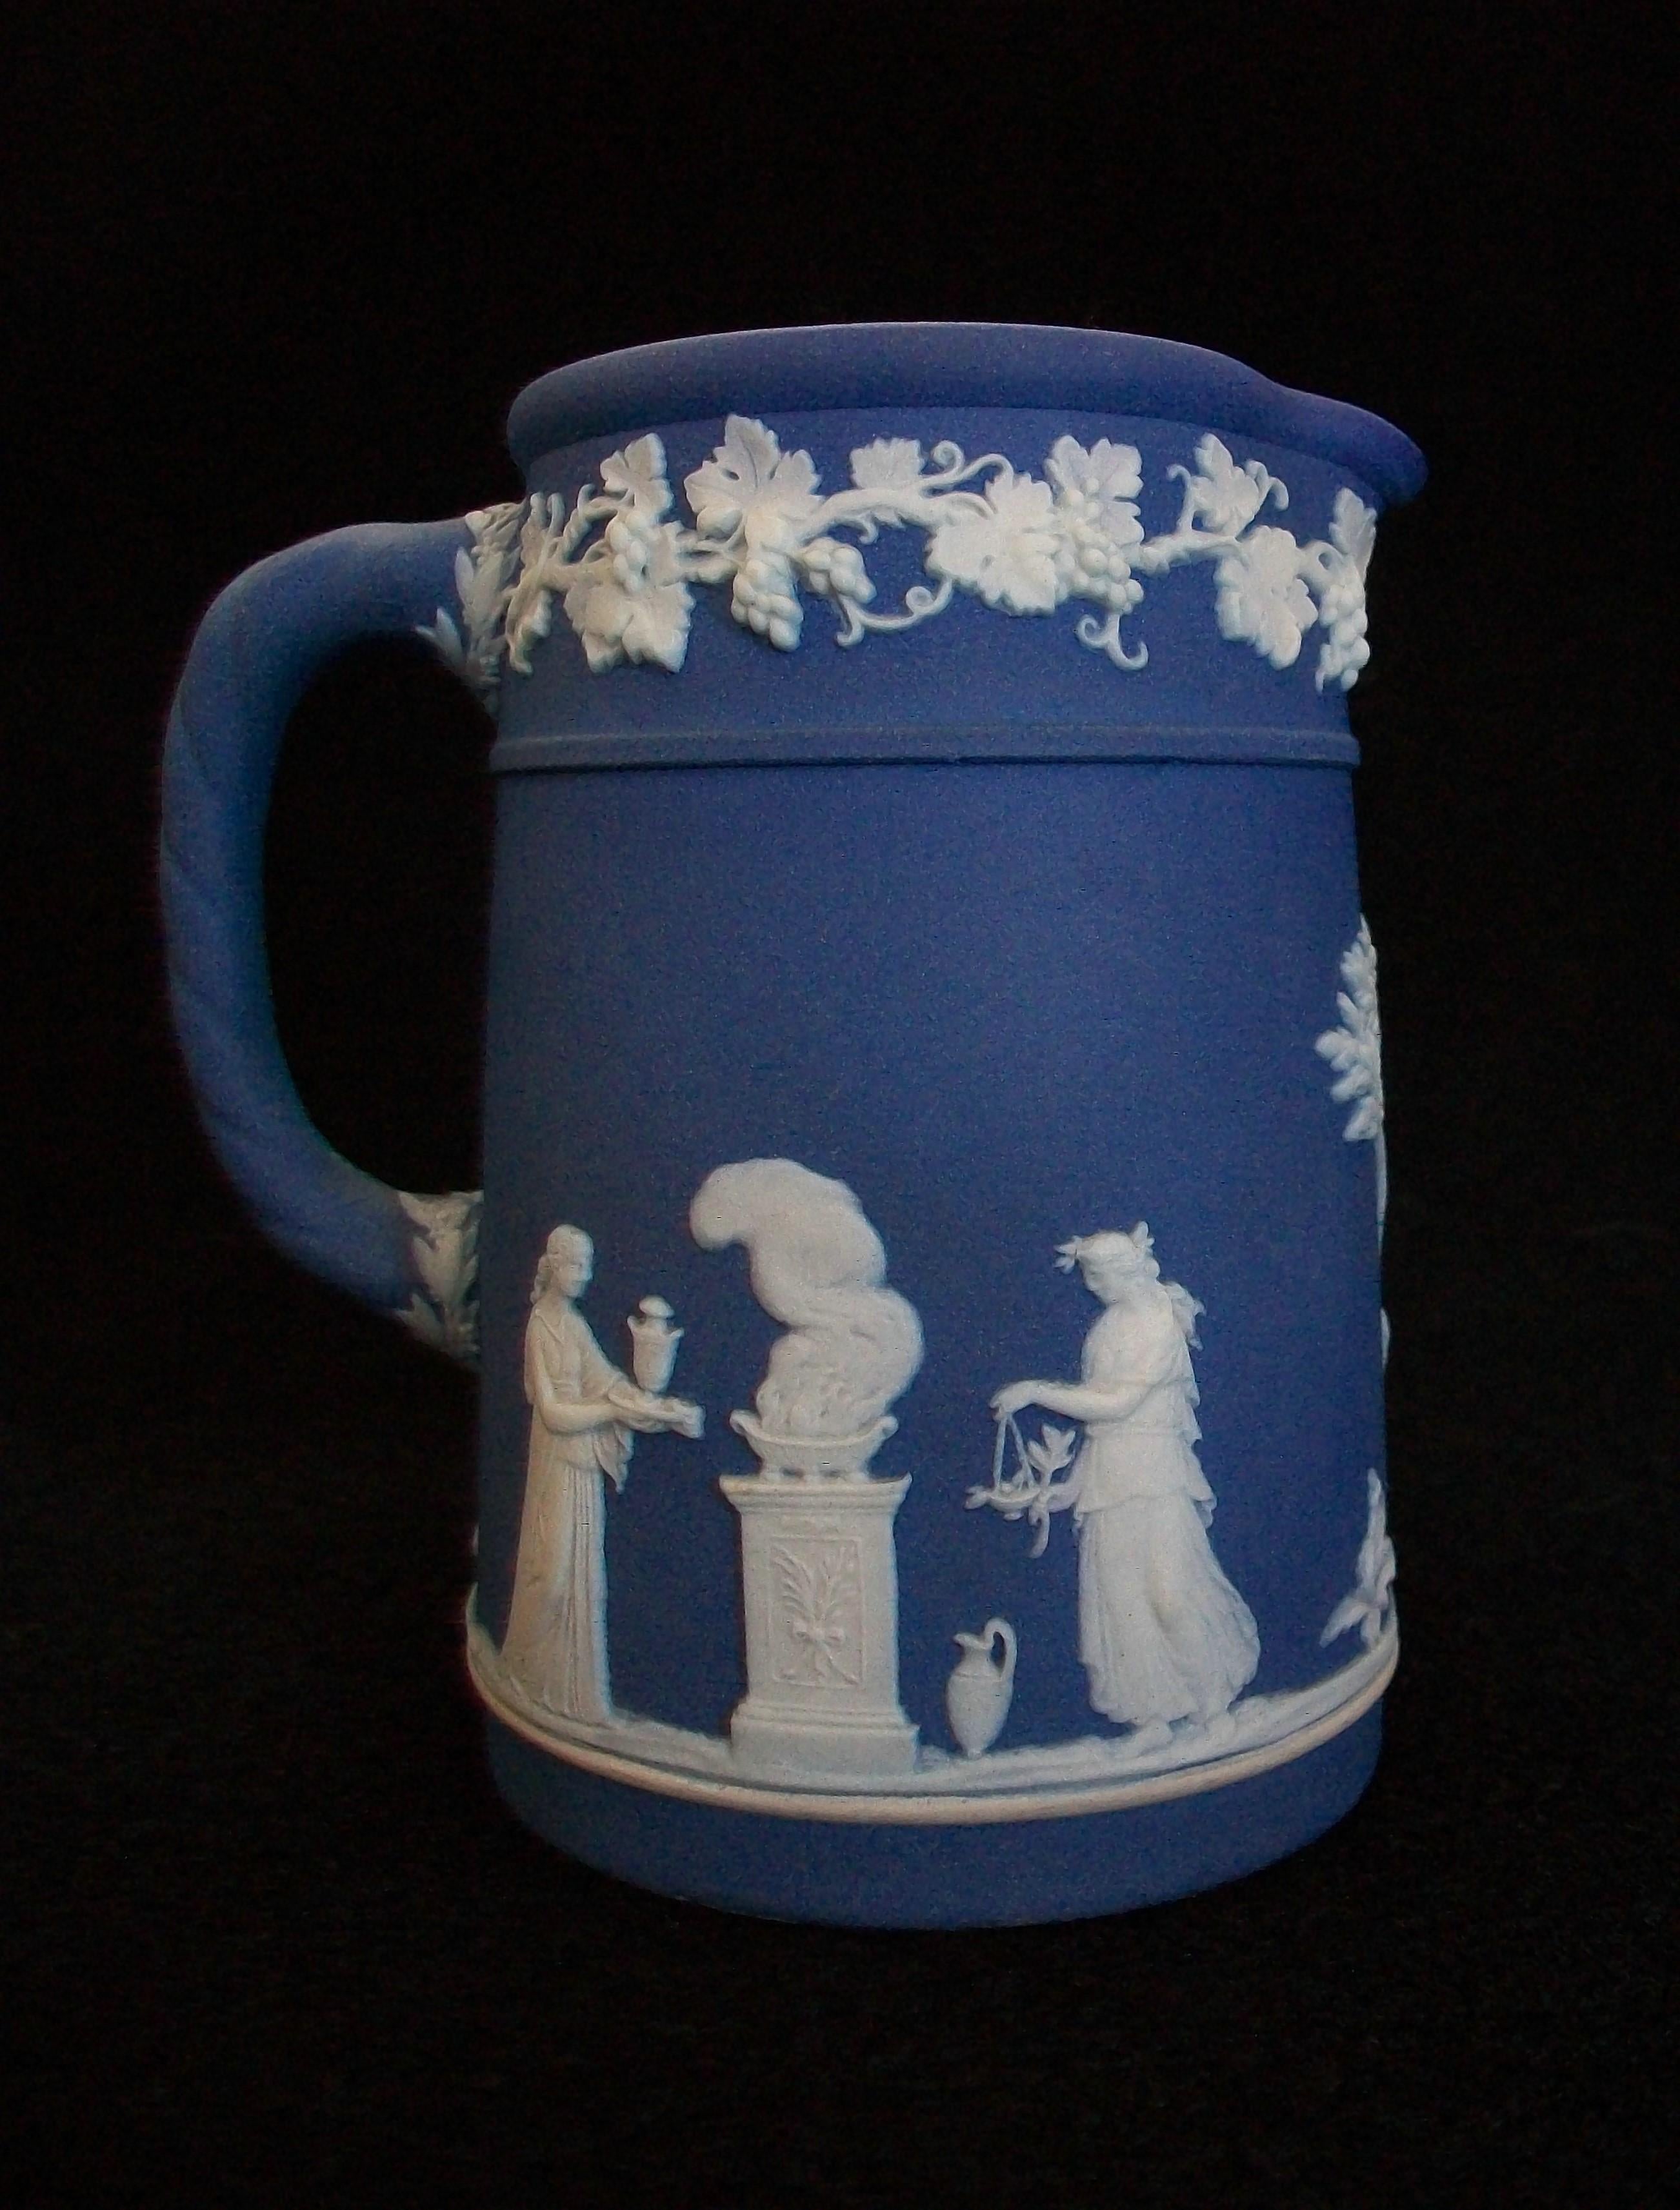 WEDGWOOD - Vintage blue and white Jasperware ceramic pitcher or creamer - signed / stamped on the base - United Kingdom - circa 1950's.

Excellent / mint vintage condition - no loss - no damage - no restoration - minimal signs of age and